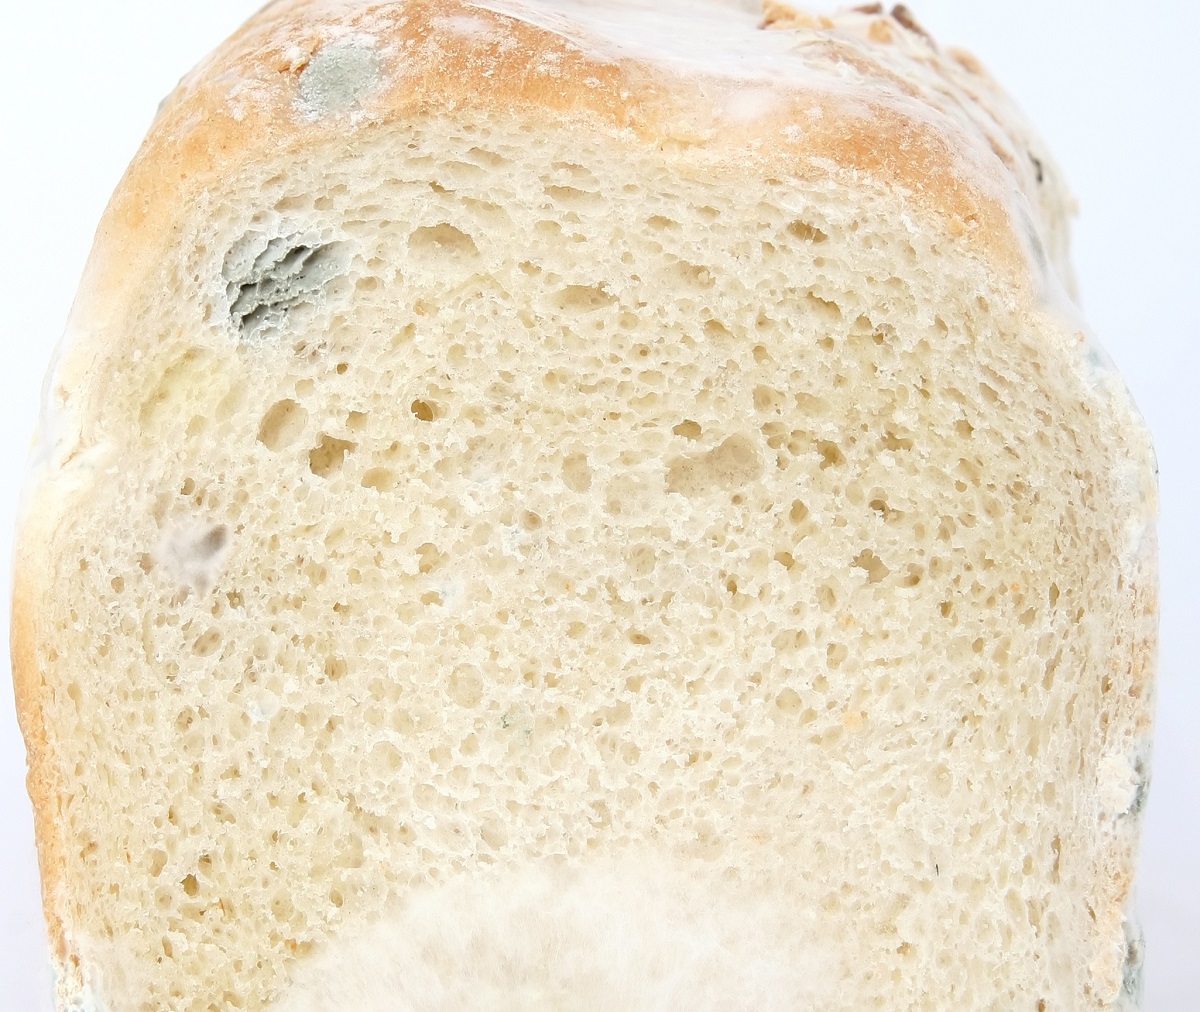 A loaf of white bread with blue and white mold spots.